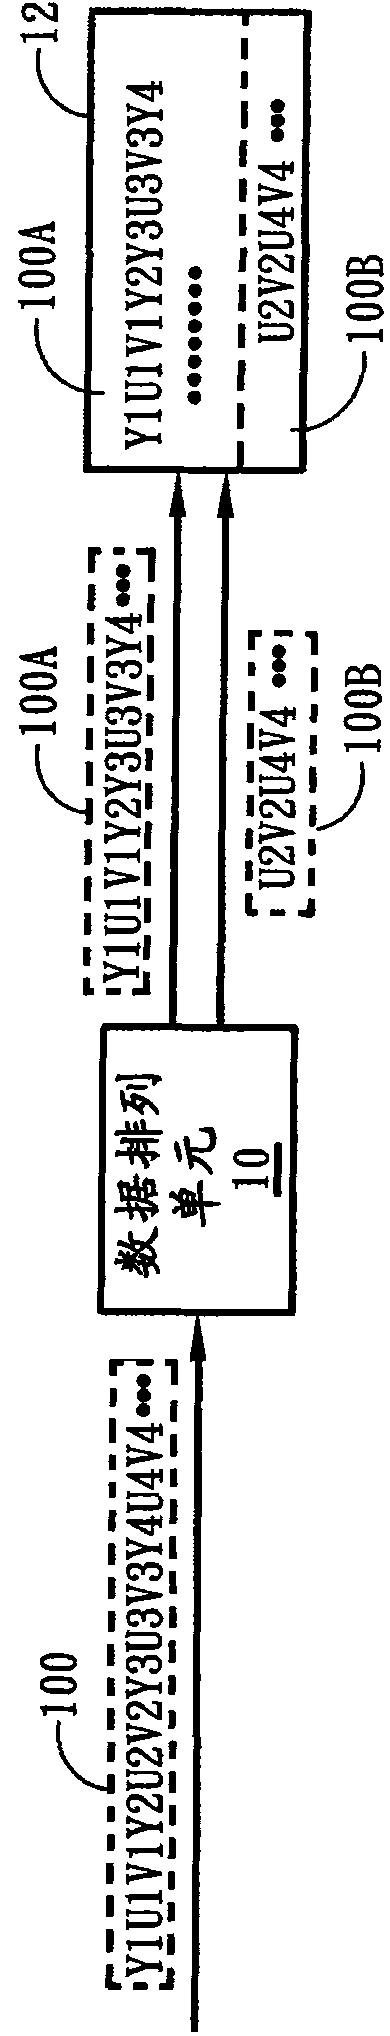 Memory access system and method effectively using memory bandwidth